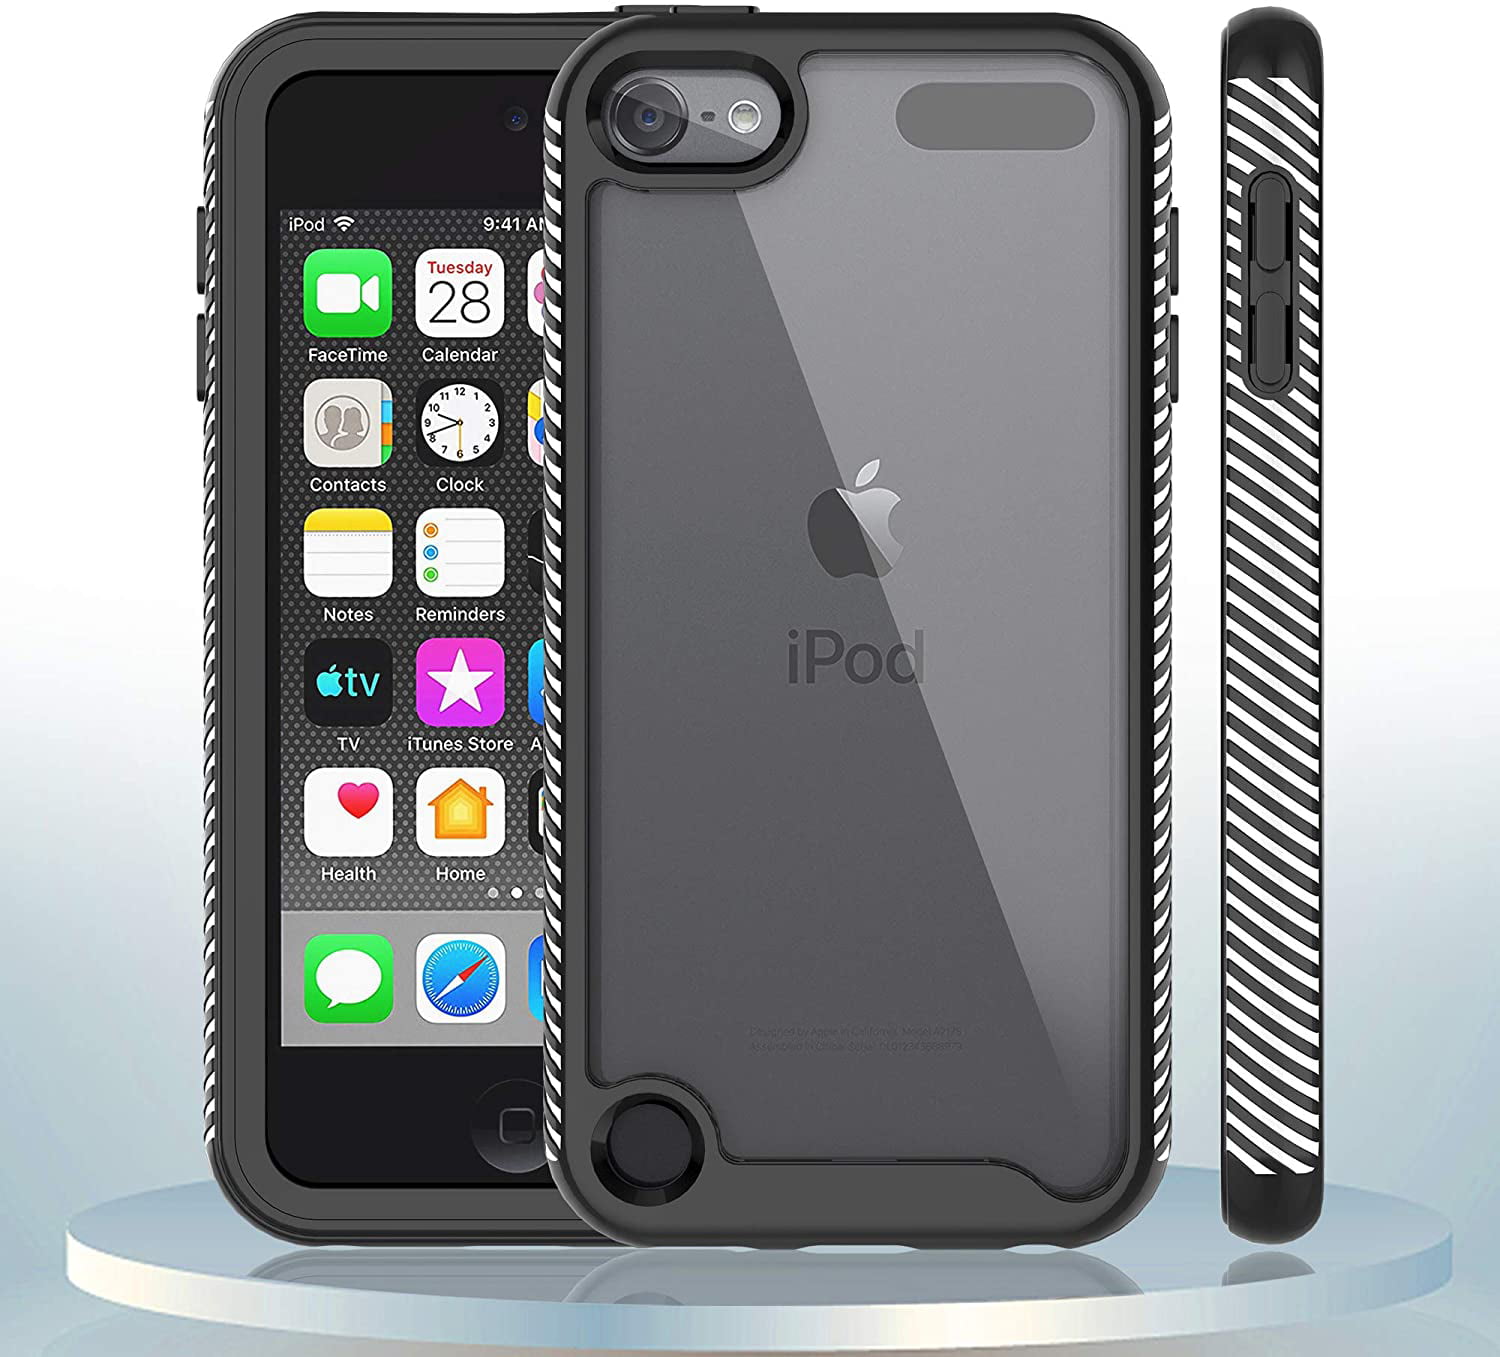 iPod Touch 7 Case,iPod Touch 6 Case,JD Armor Shockproof Case with Build in Screen Protector Heavy Duty Shock Resistant Hybrid Rugged Cover for Apple iPod Touch 5/6/7th Generation-SpaceGray 